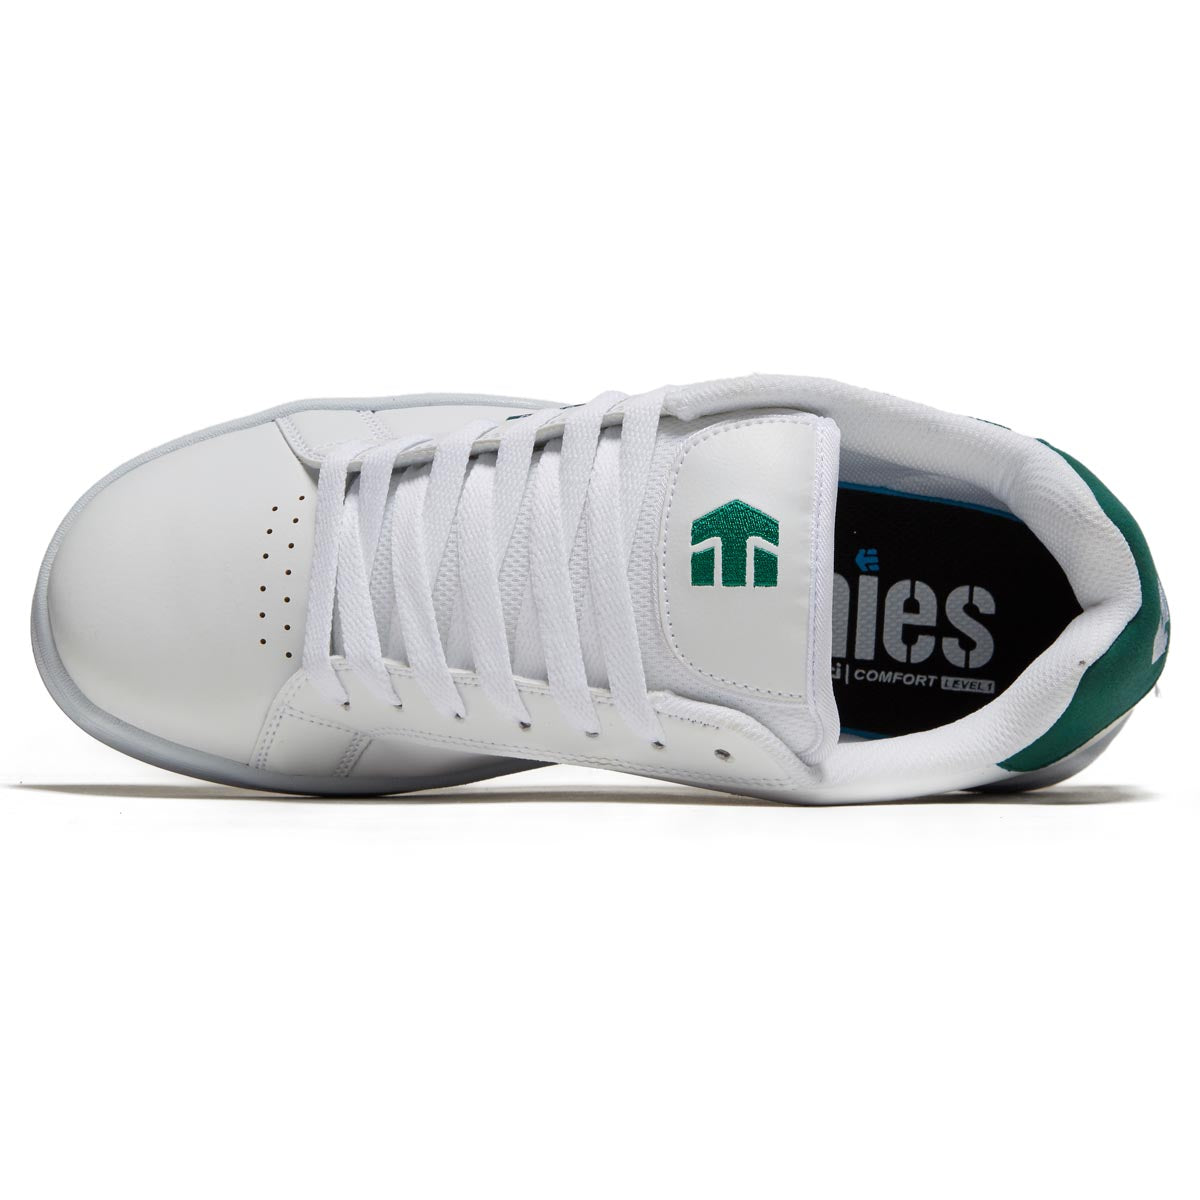 Etnies Fader Shoes - White/Green image 3